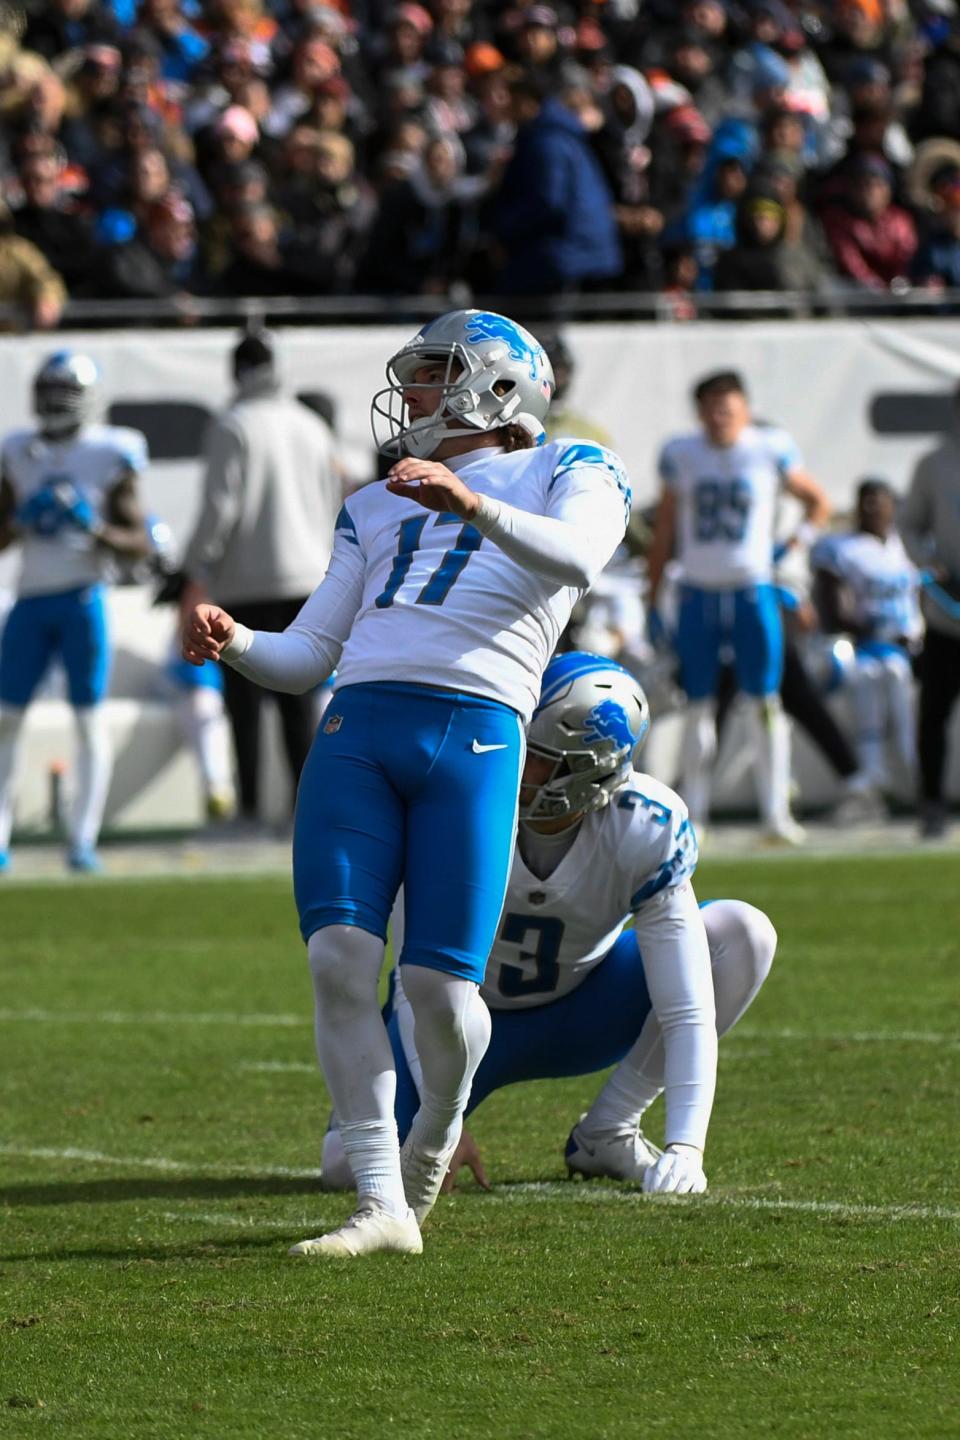 Nov 13, 2022; Chicago, Illinois, USA;  Detroit Lions place kicker Michael Badgley (17) watches his field goal against the Chicago Bears during the first half at Soldier Field. Mandatory Credit: Matt Marton-USA TODAY Sports